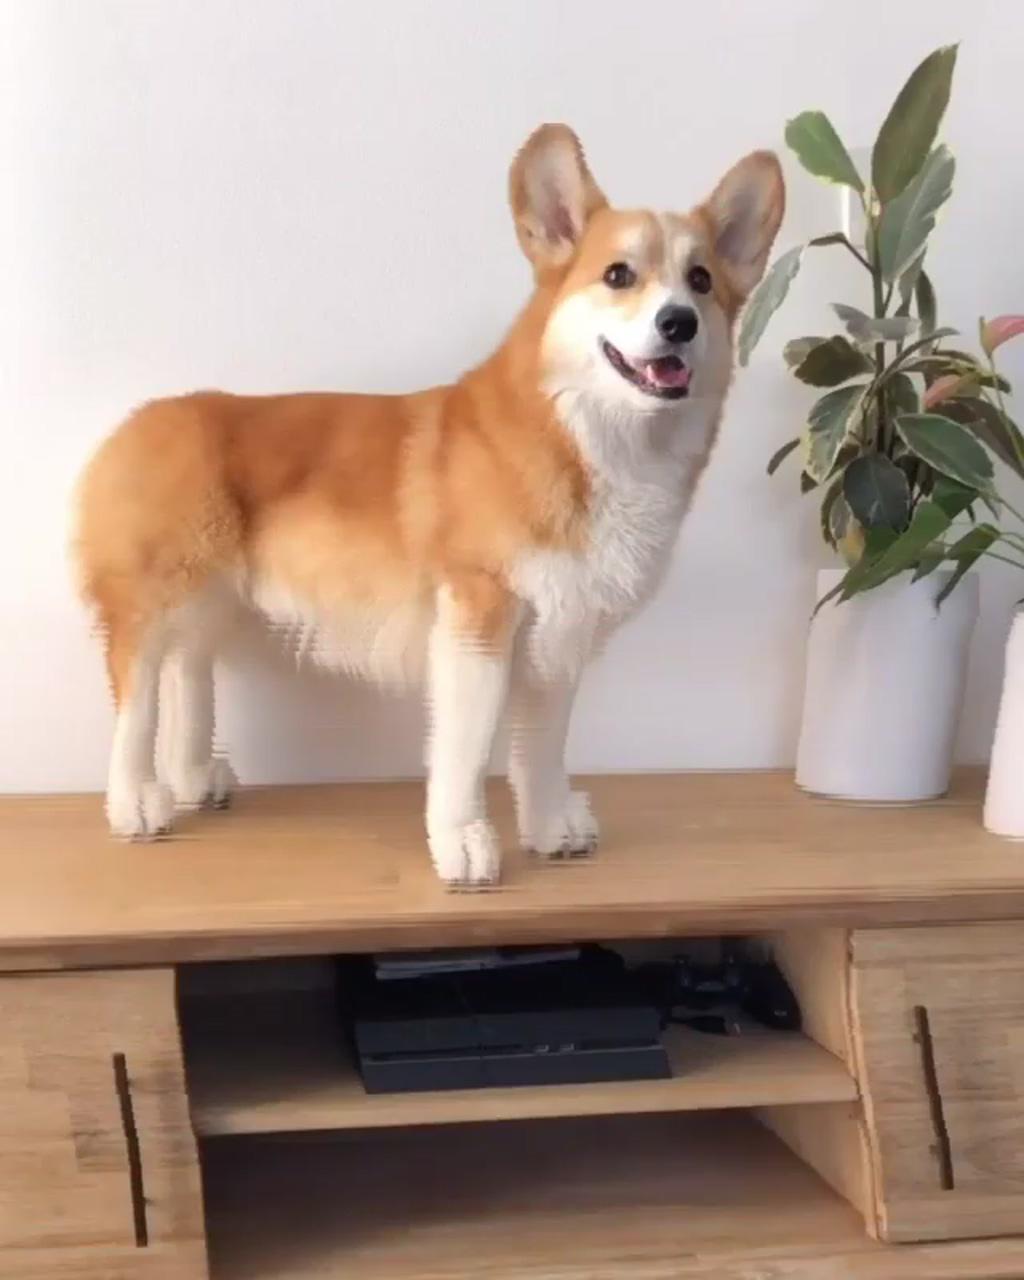 If corgis had normal legs  ; so adorable you have such and adorable dog